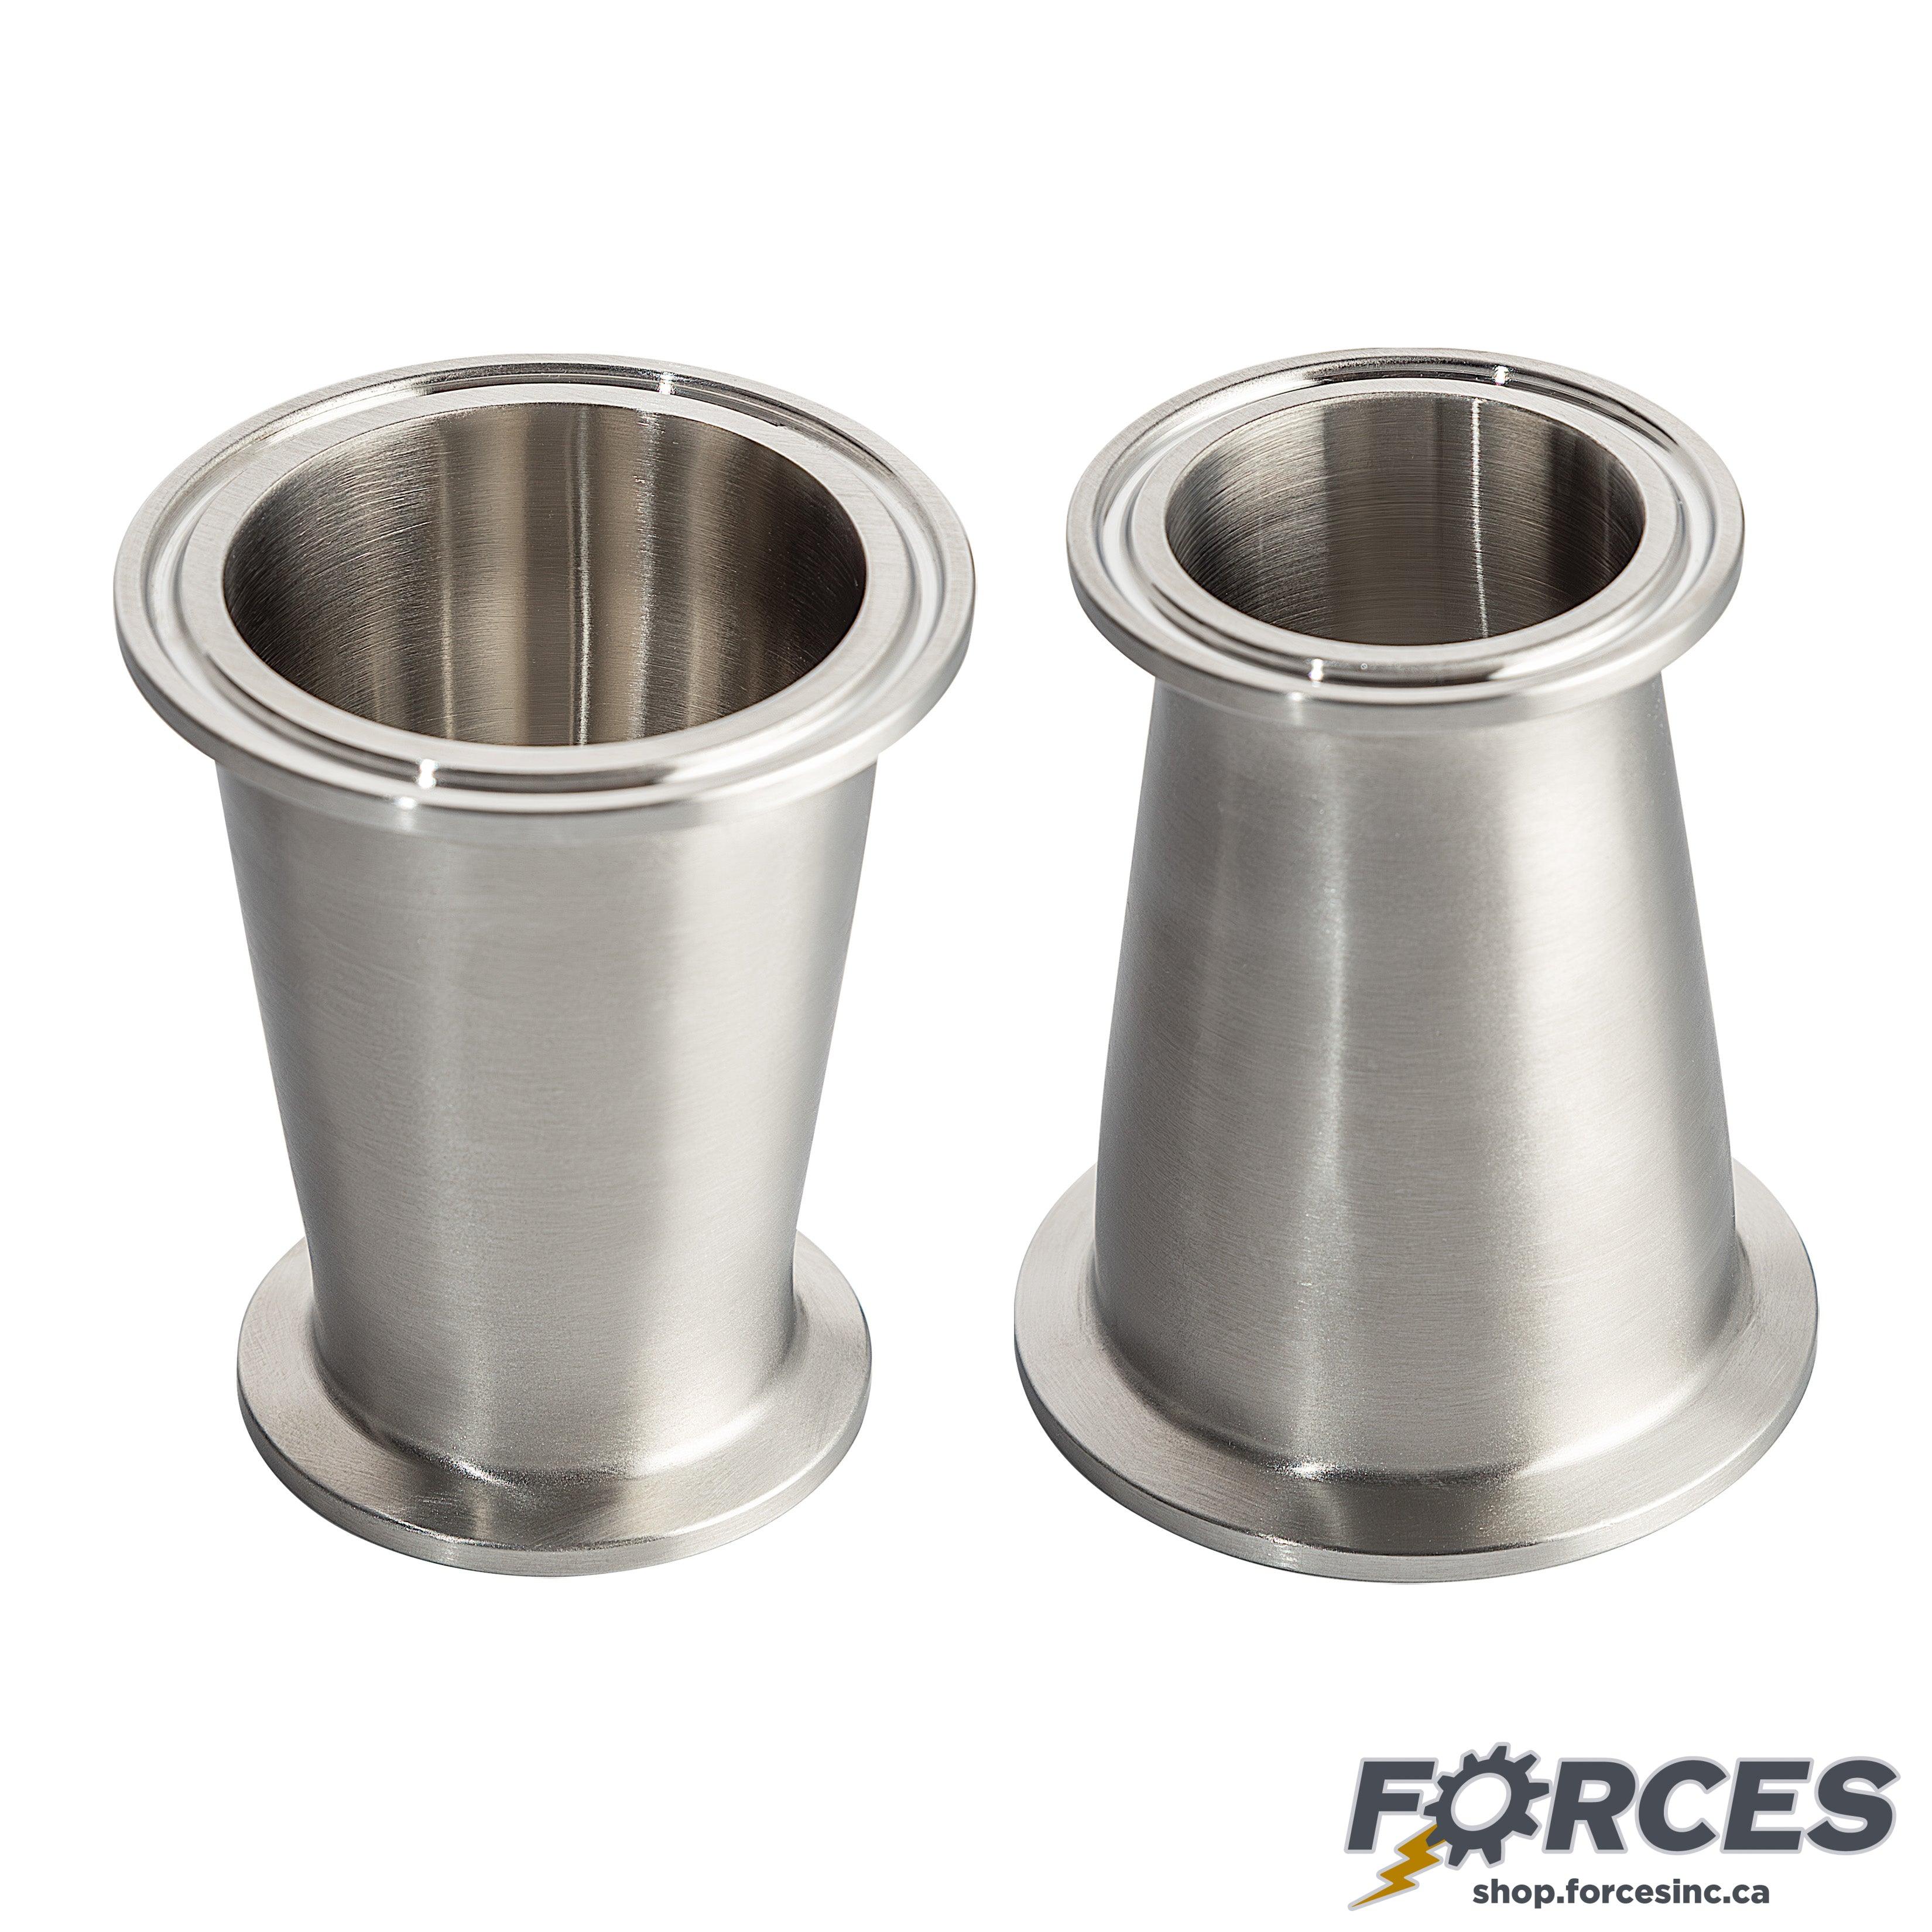 1-1/2" x 1/2" Tri-Clamp Concentric Reducer - Stainless Steel 316 - Forces Inc